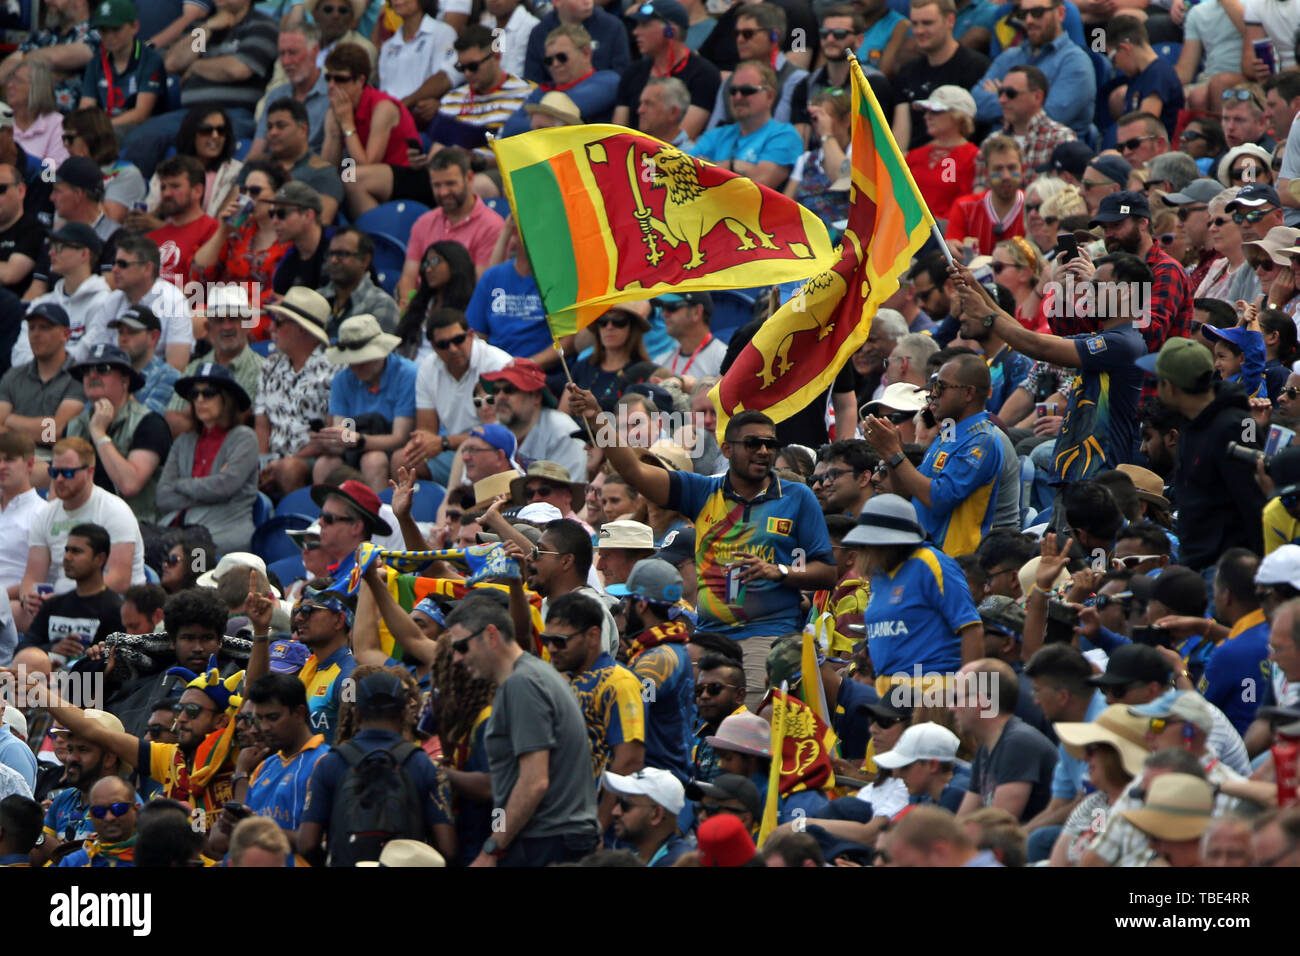 Cardiff, Wales, UK. 1st June 2019, Sophia Gardens Cardiff, cardiff, Wales ; ICC World Cup Cricket test match, New Zealand versus Sri Lanka; Sri Lanka fans wave flags in the crowd Stock Photo